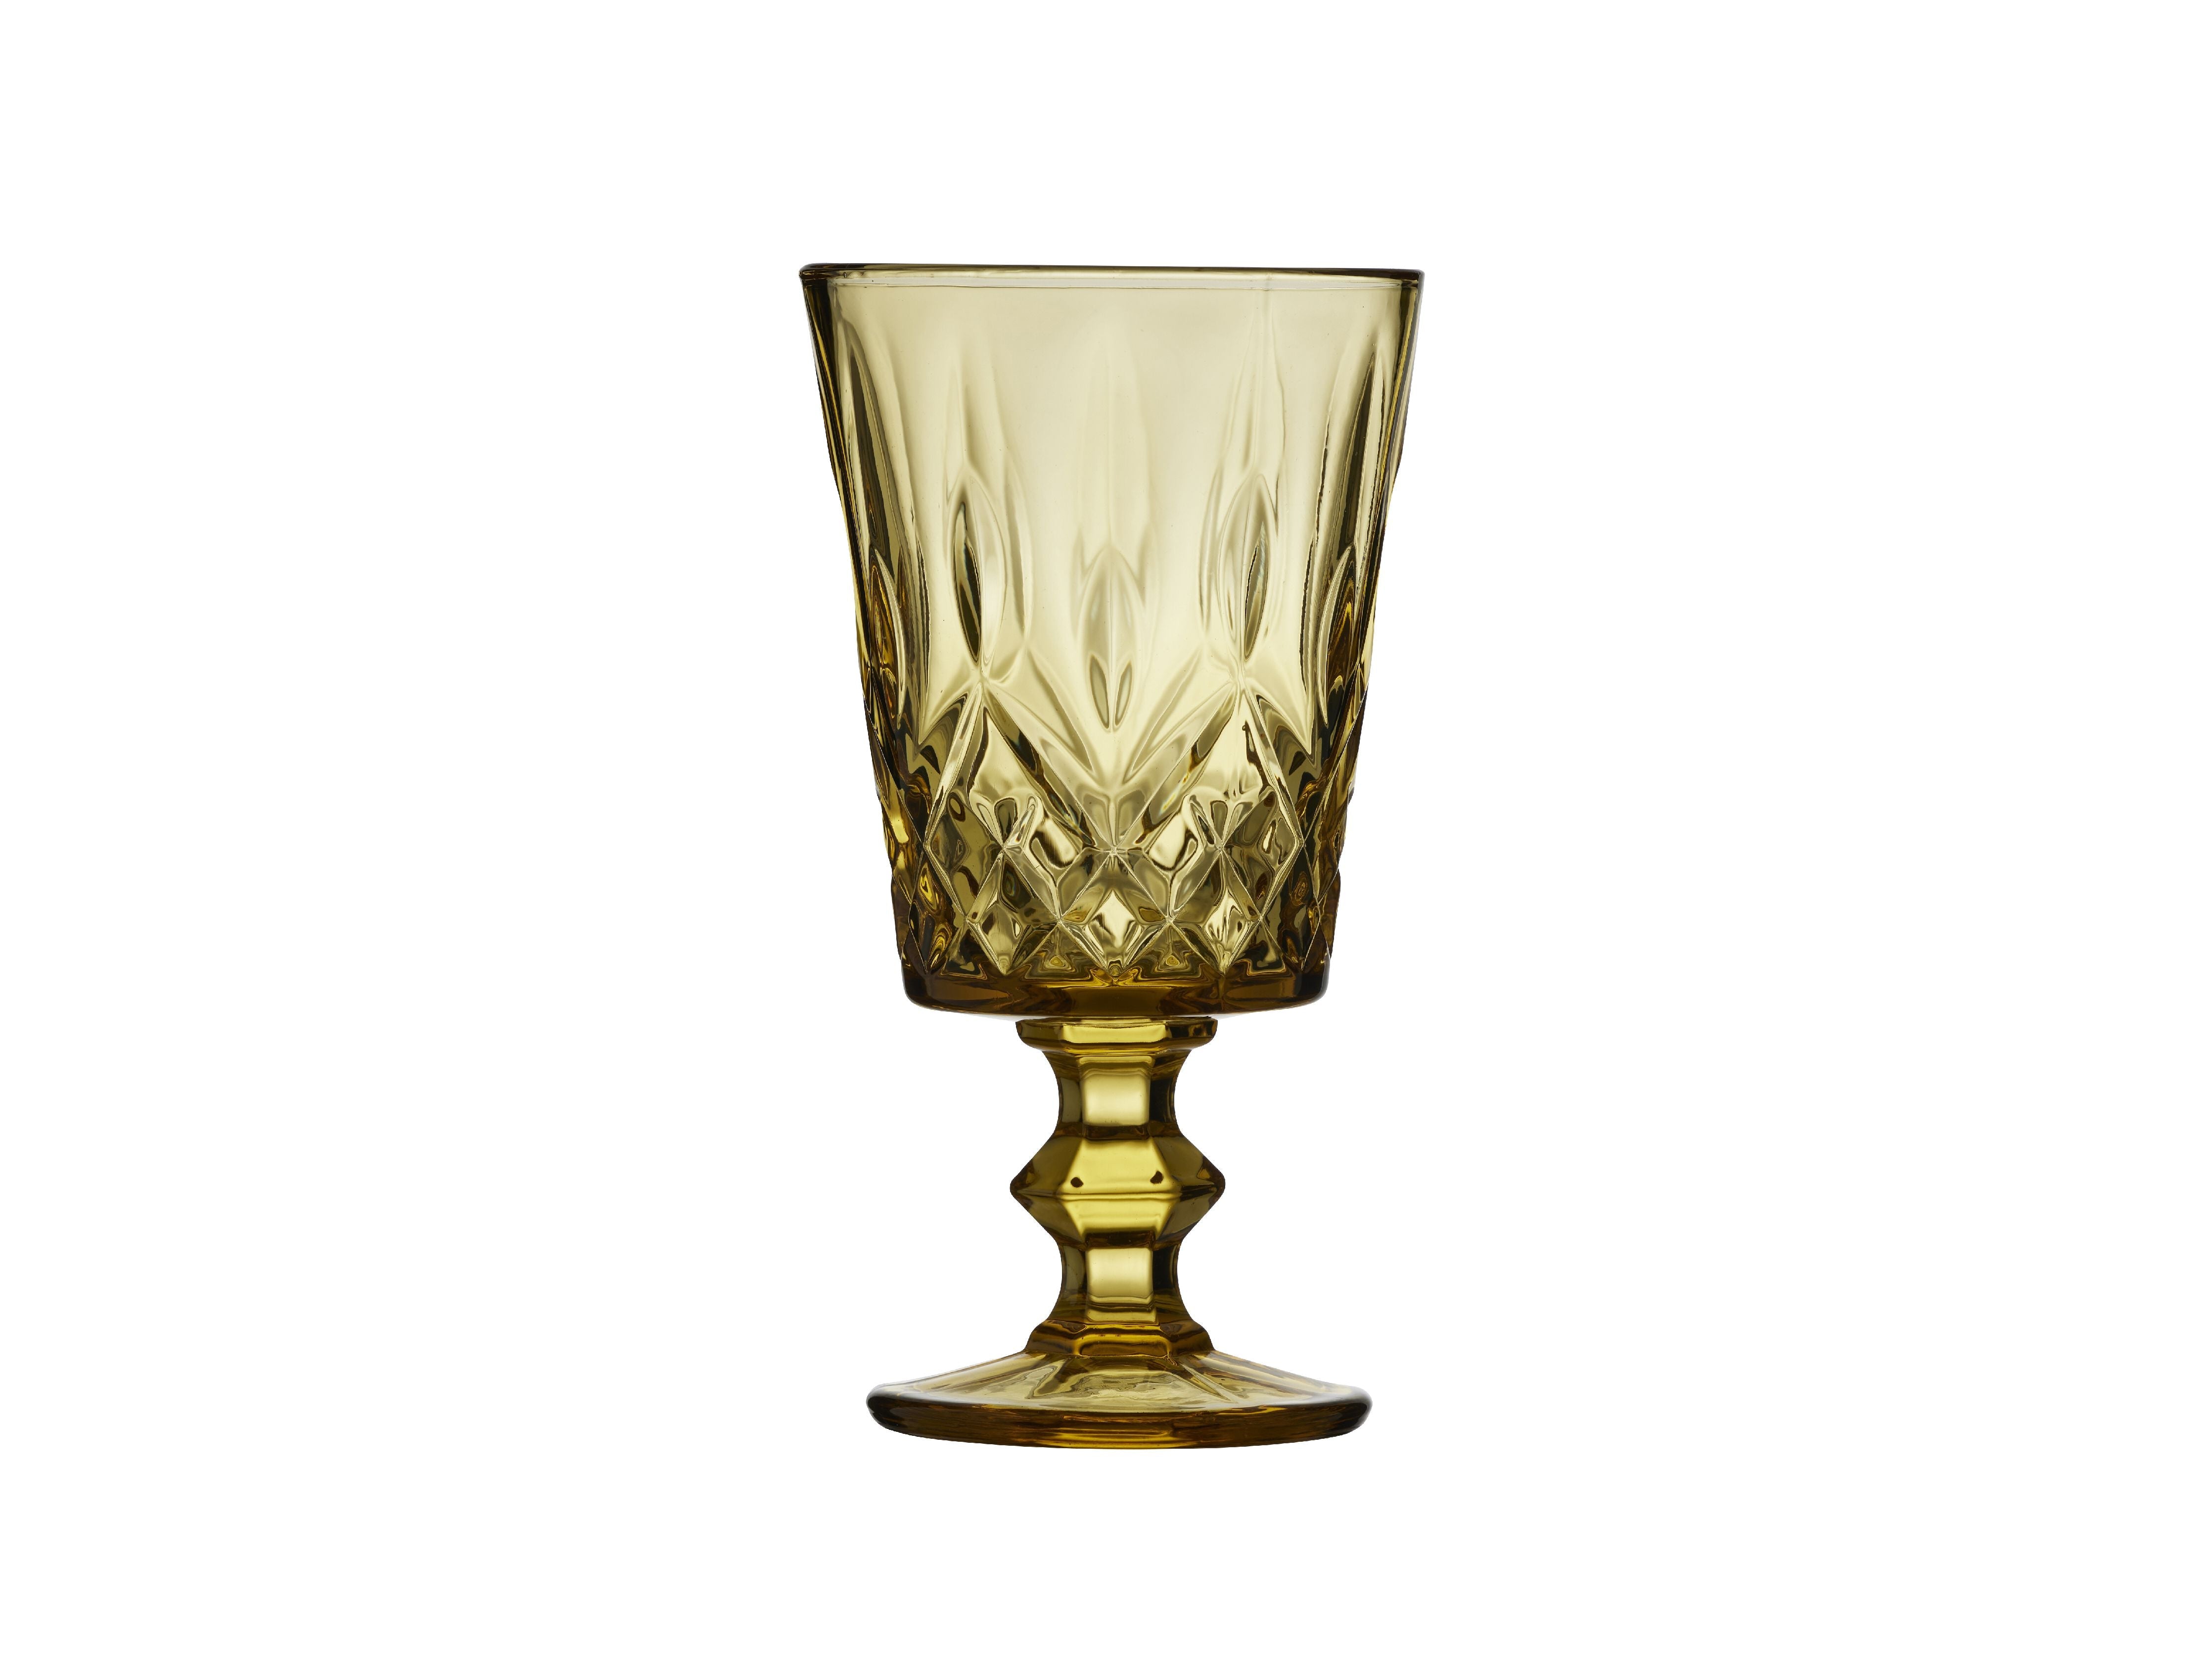 Lyngby Glas Sorrento酒杯29 Cl 4 PC。，琥珀色